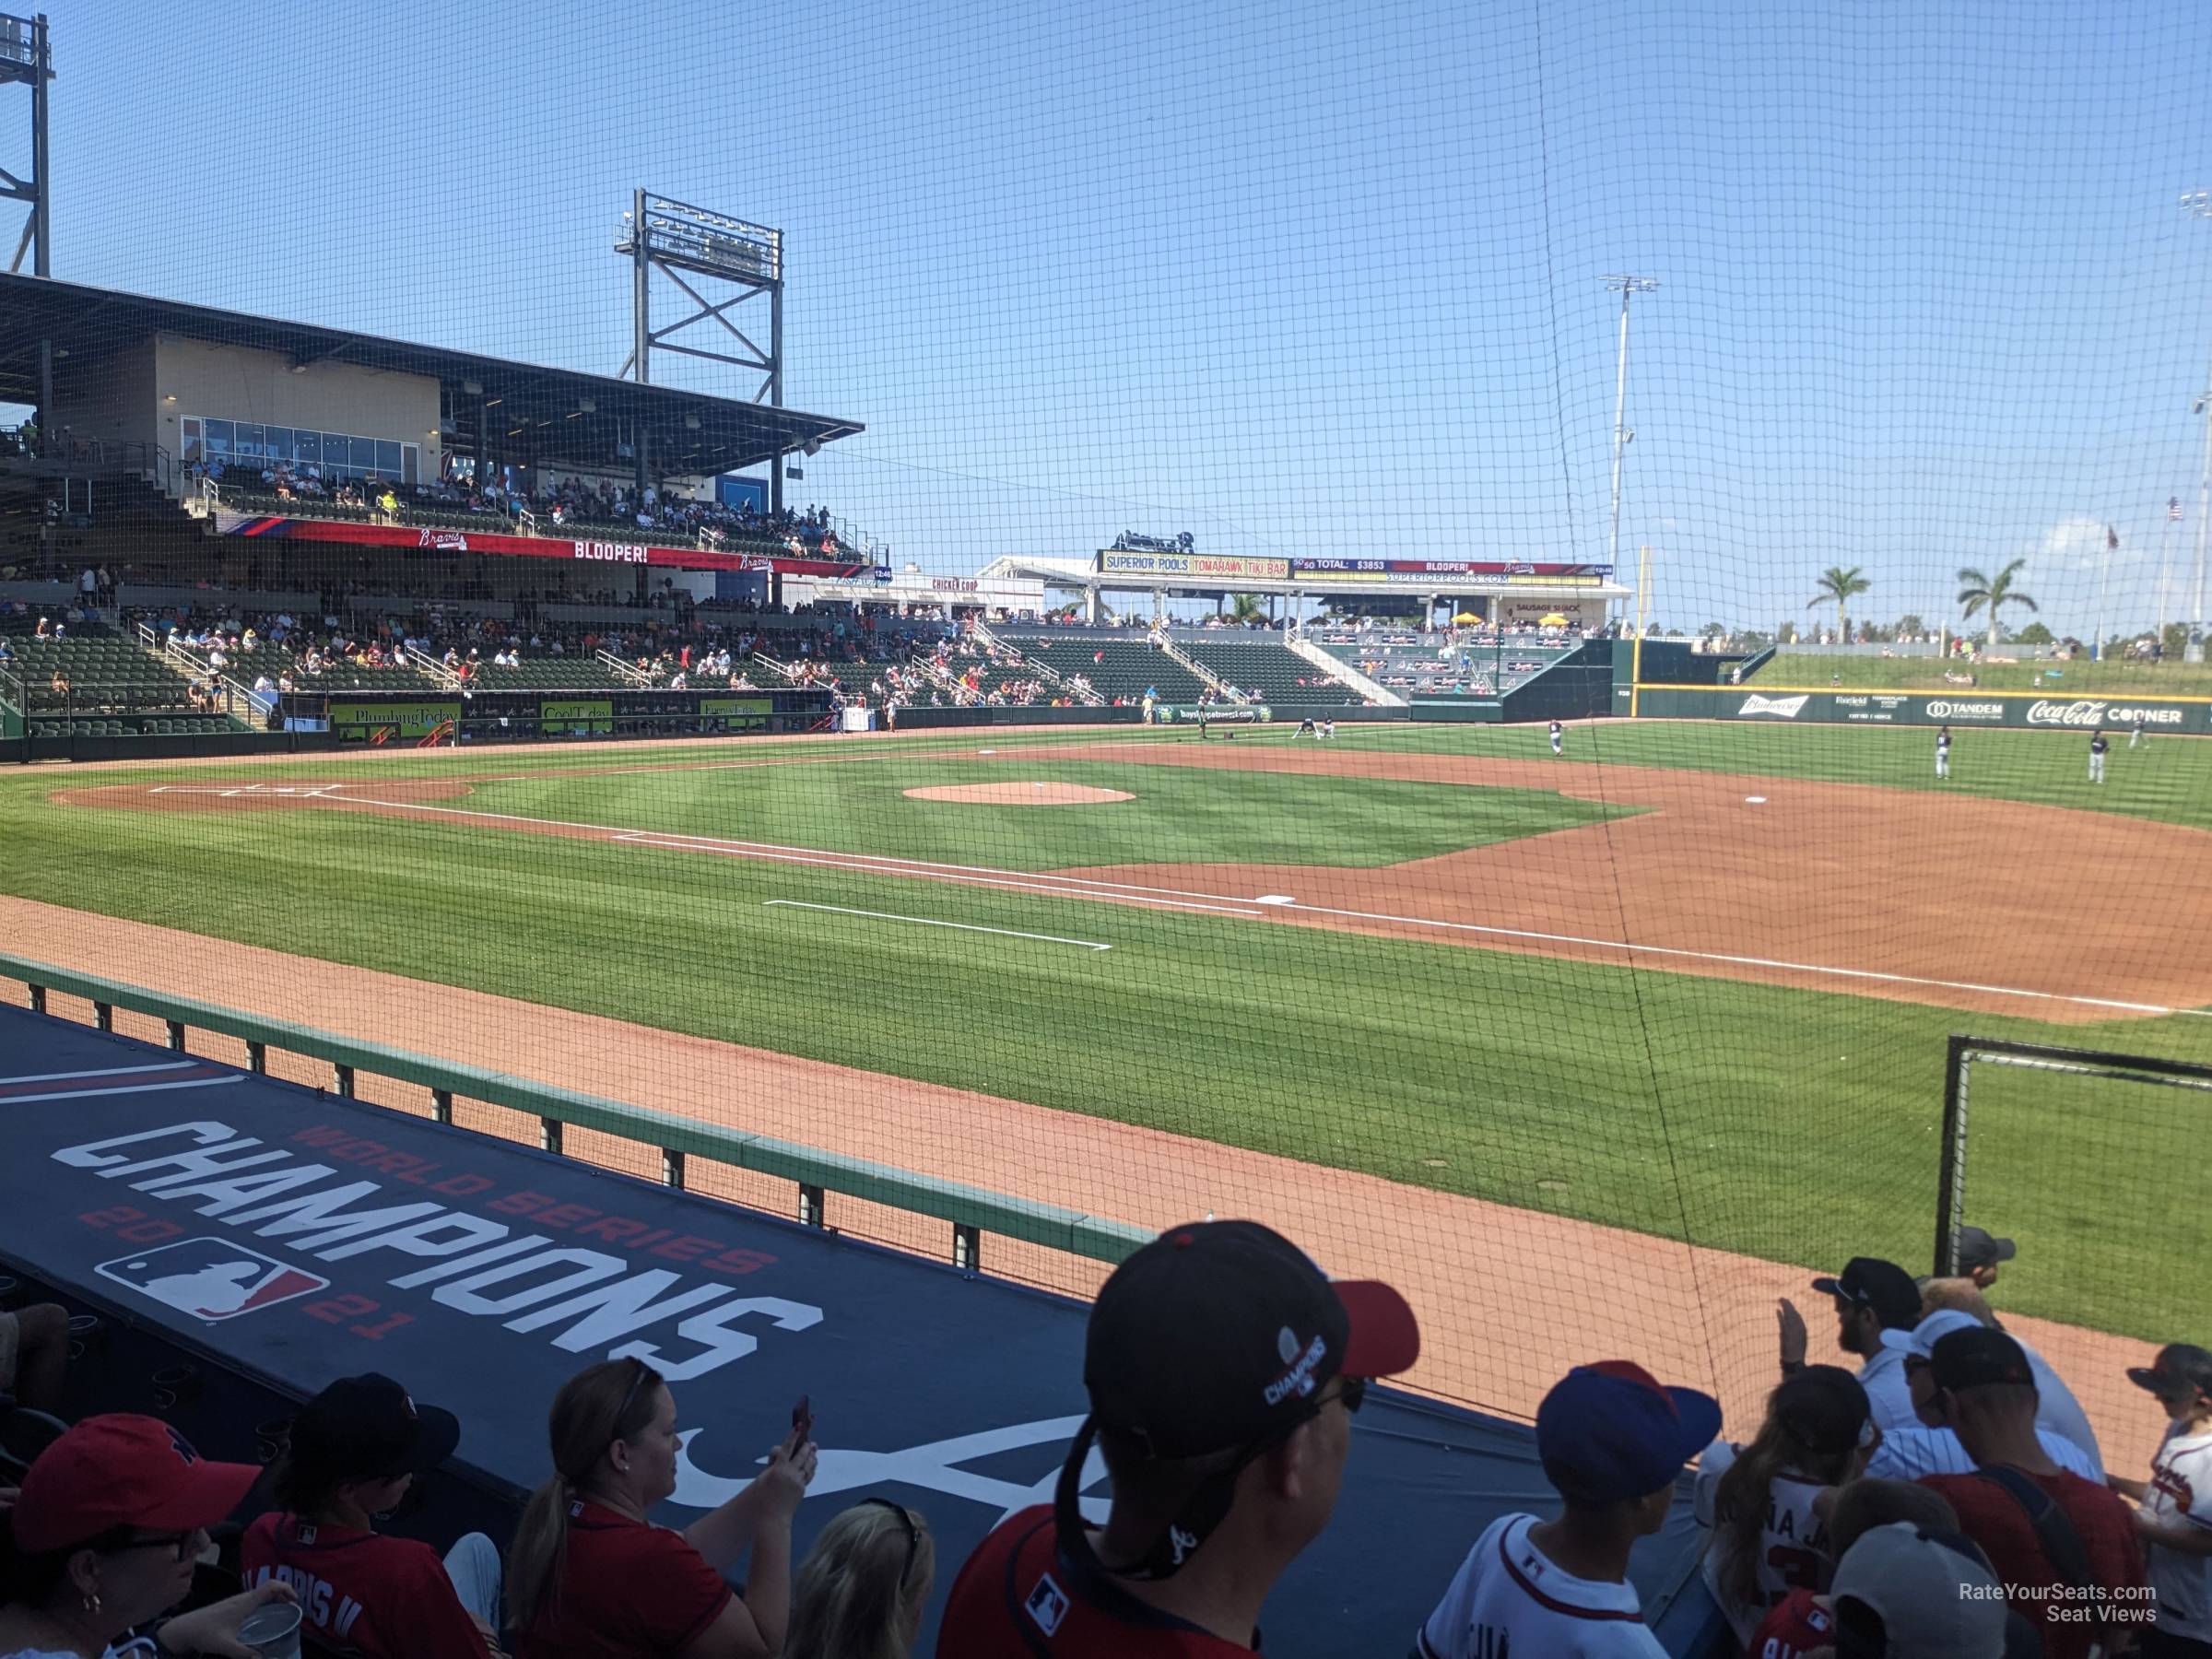 section 107, row 9 seat view  - cooltoday park